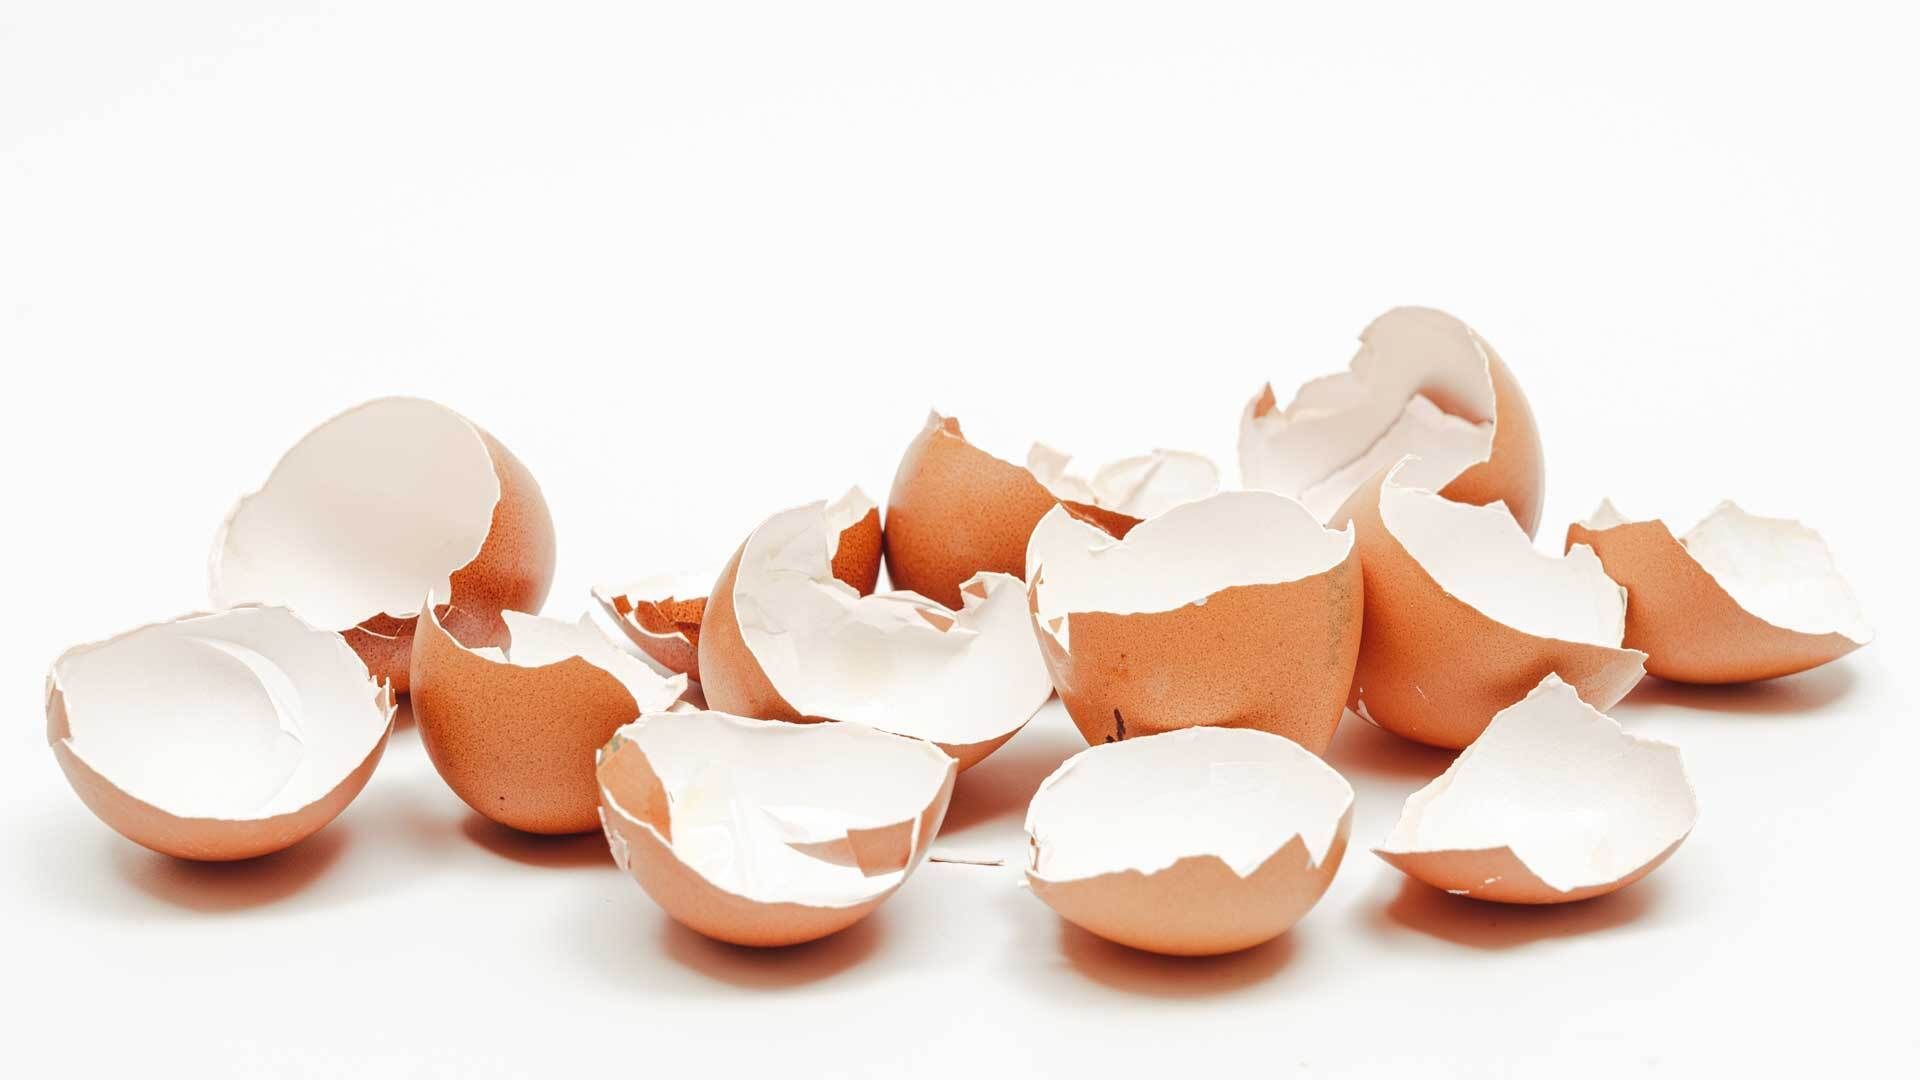 Eggshells: The natural boost for your garden plants